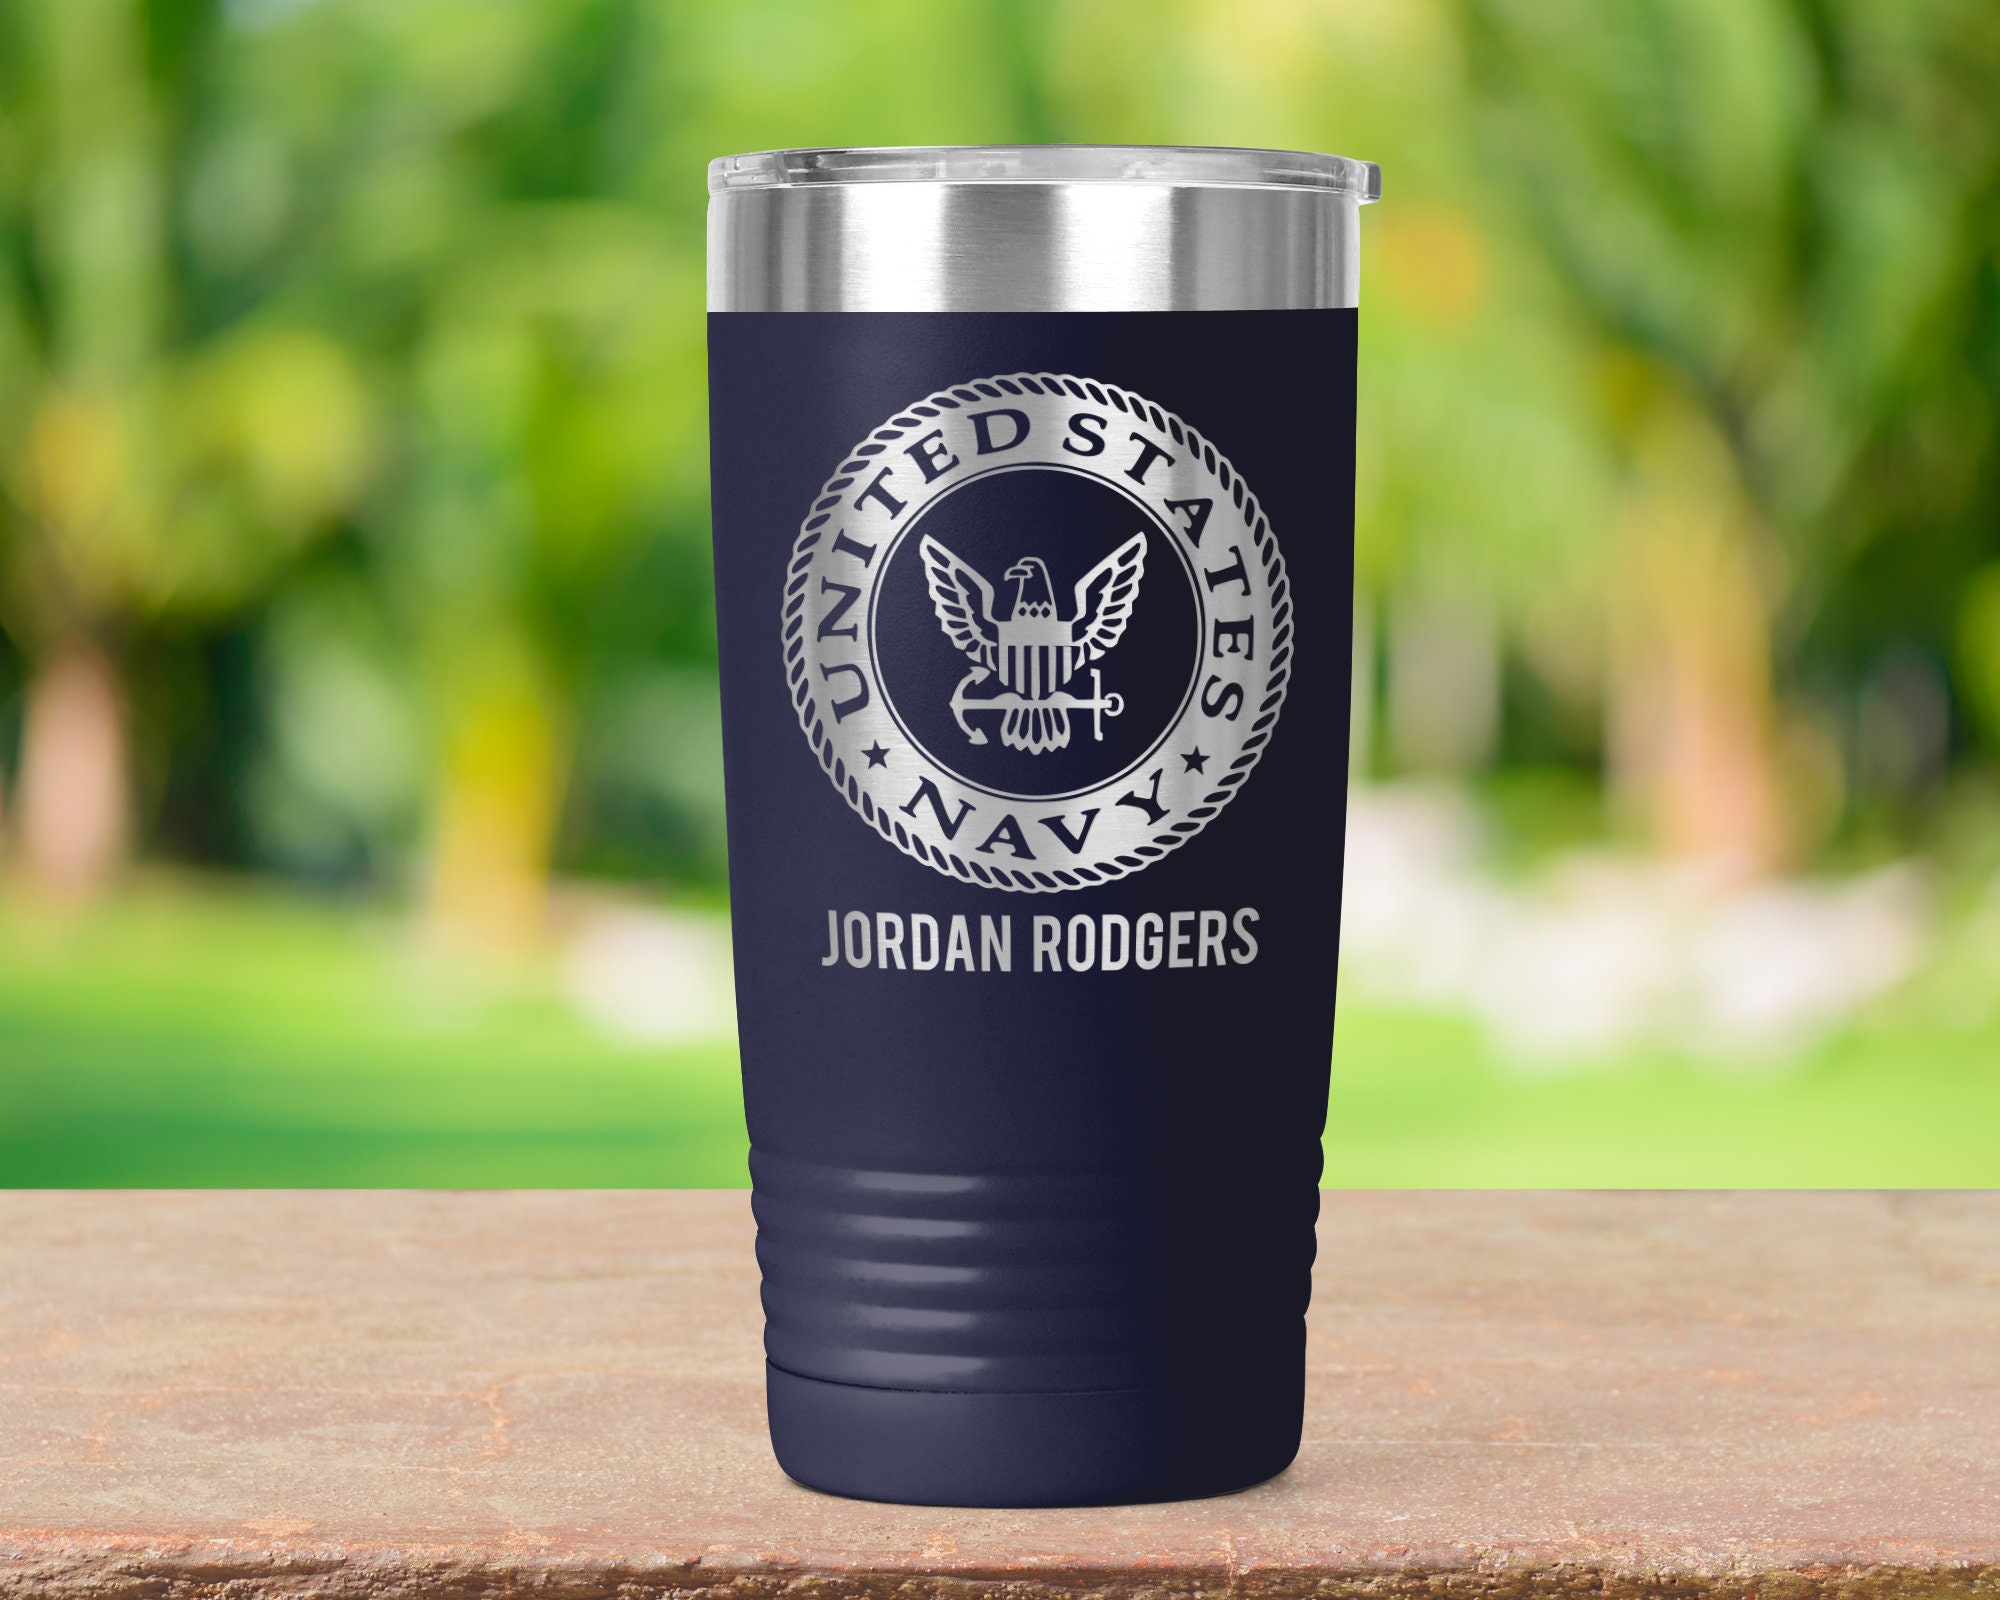  US Navy Surface Warfare Design, Laser Engraved Yeti Stainless  Steel Tumbler With Your Choice Of NEW DuraCoat Colors - NOT A STICKER!! :  Handmade Products